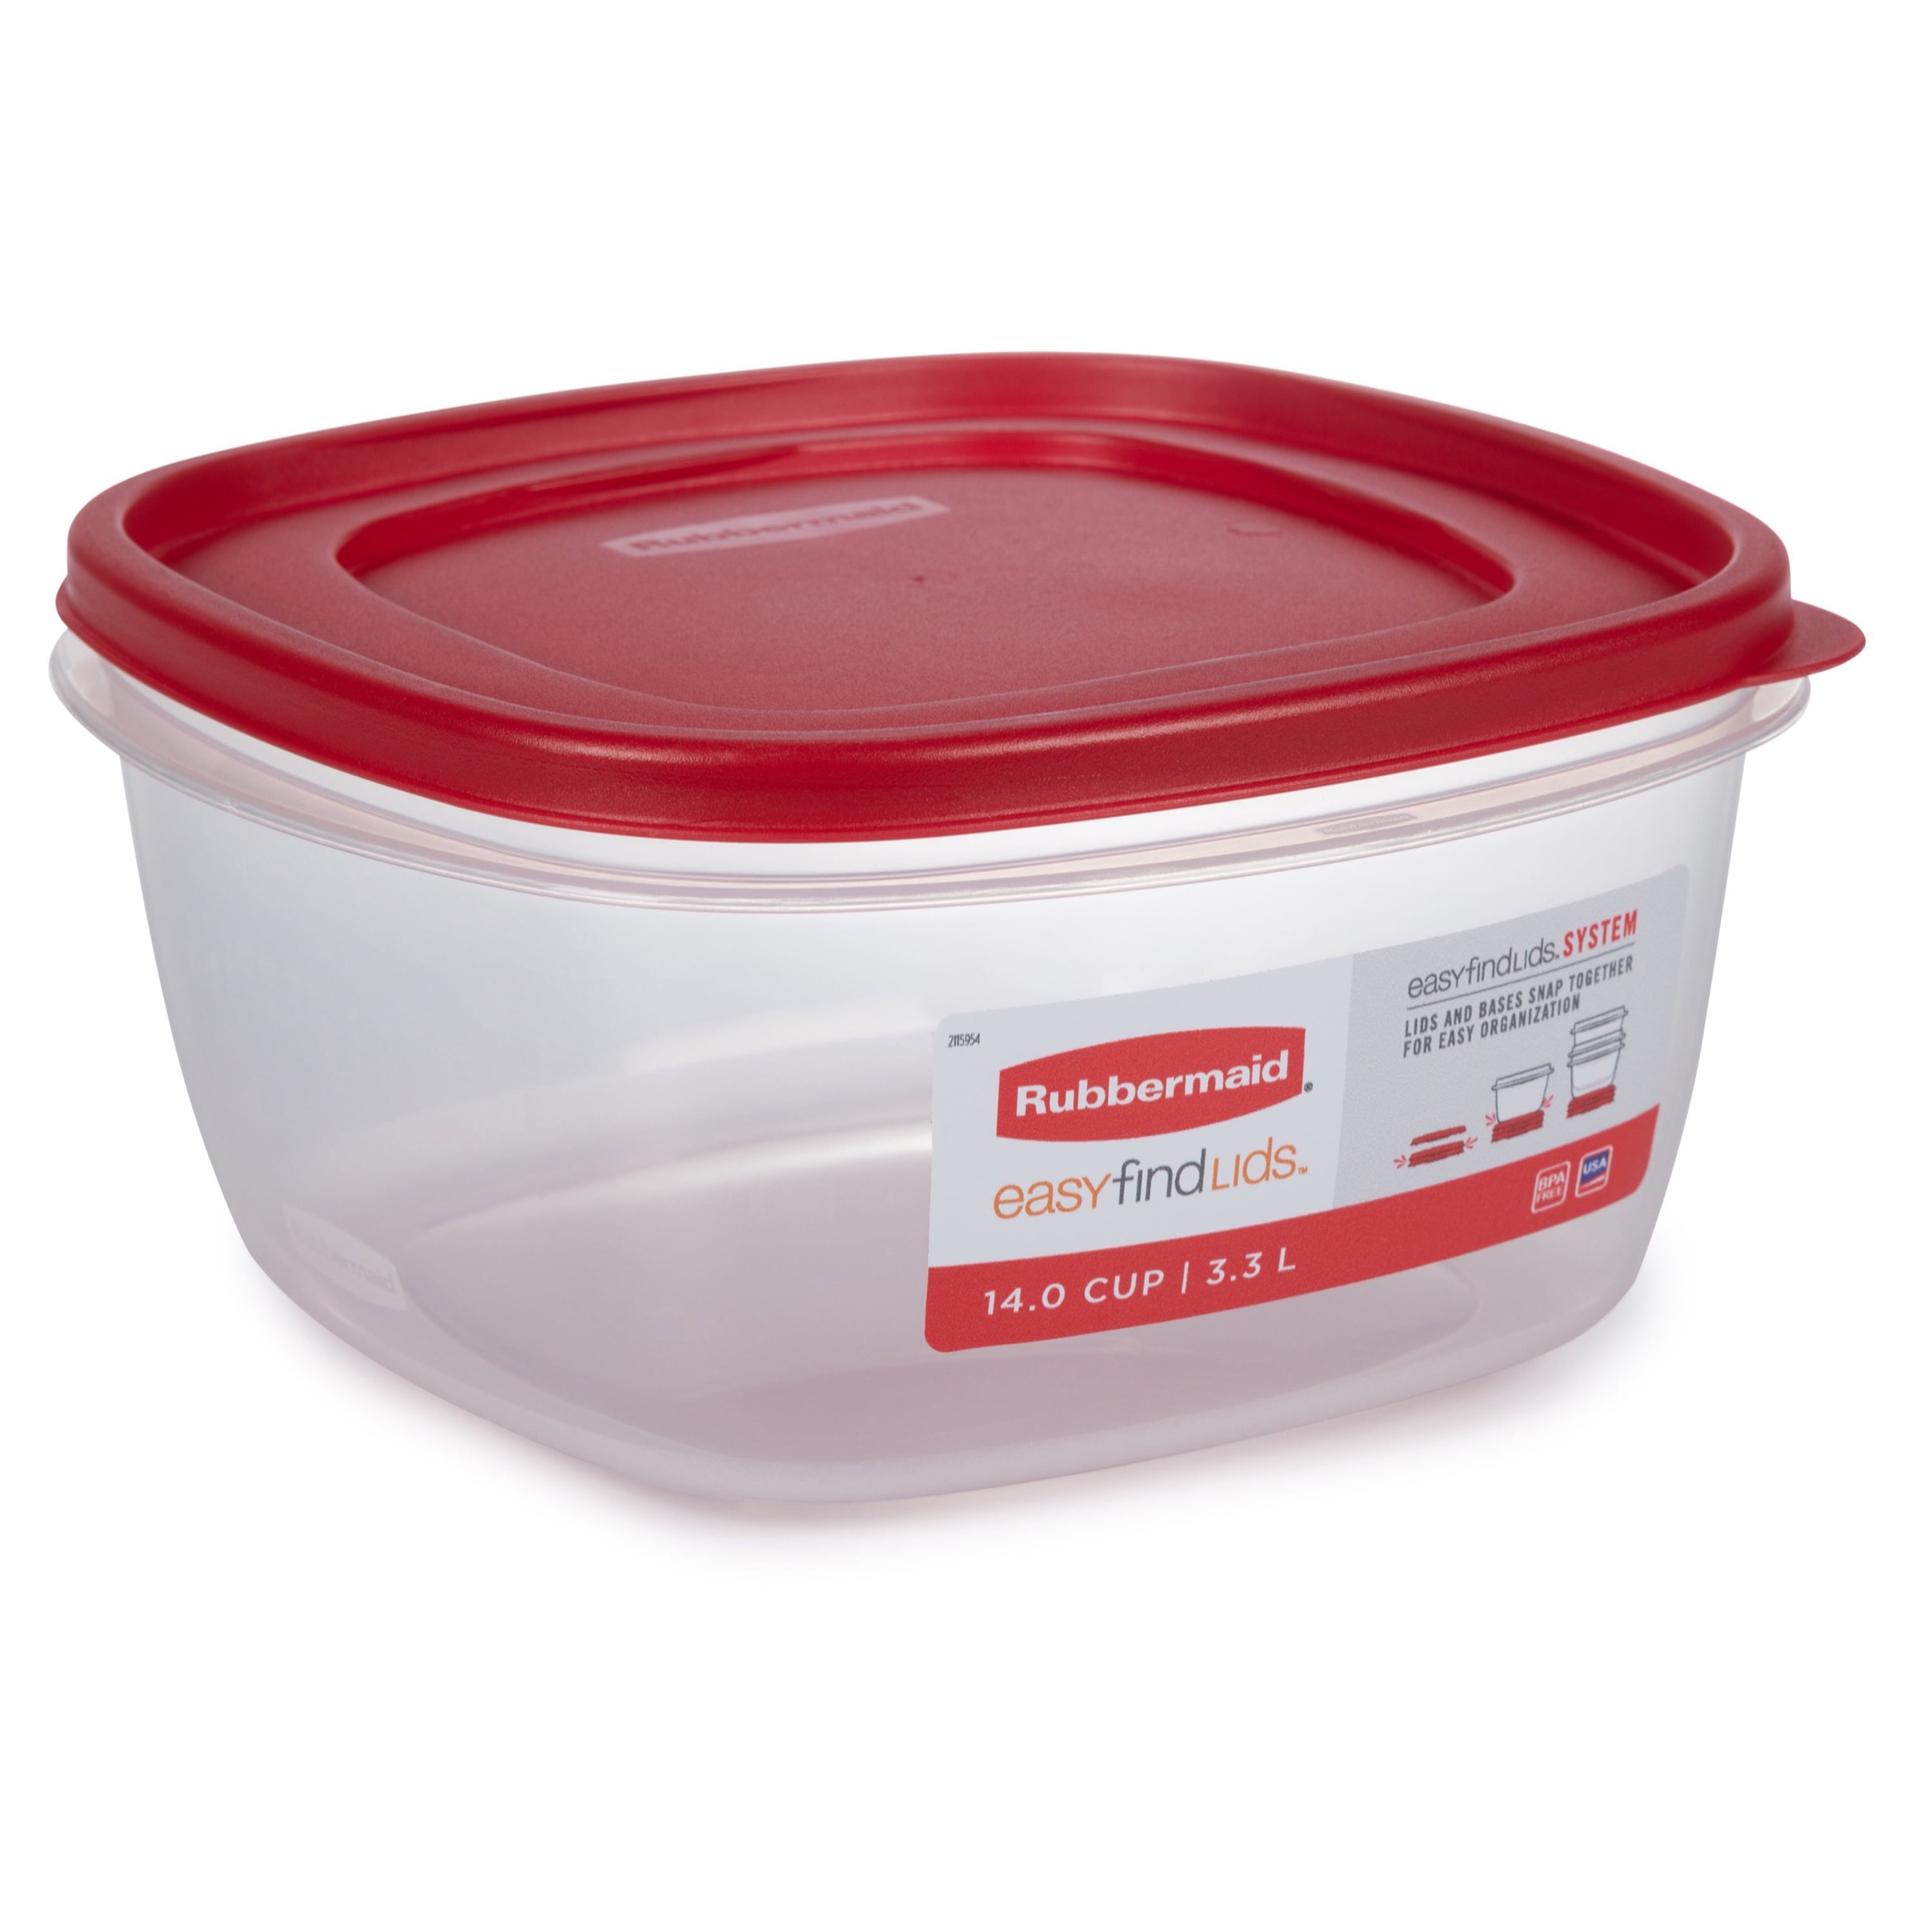 Rubbermaid 1937693 Premier Stain Shield Food Storage Container, 14-Cup